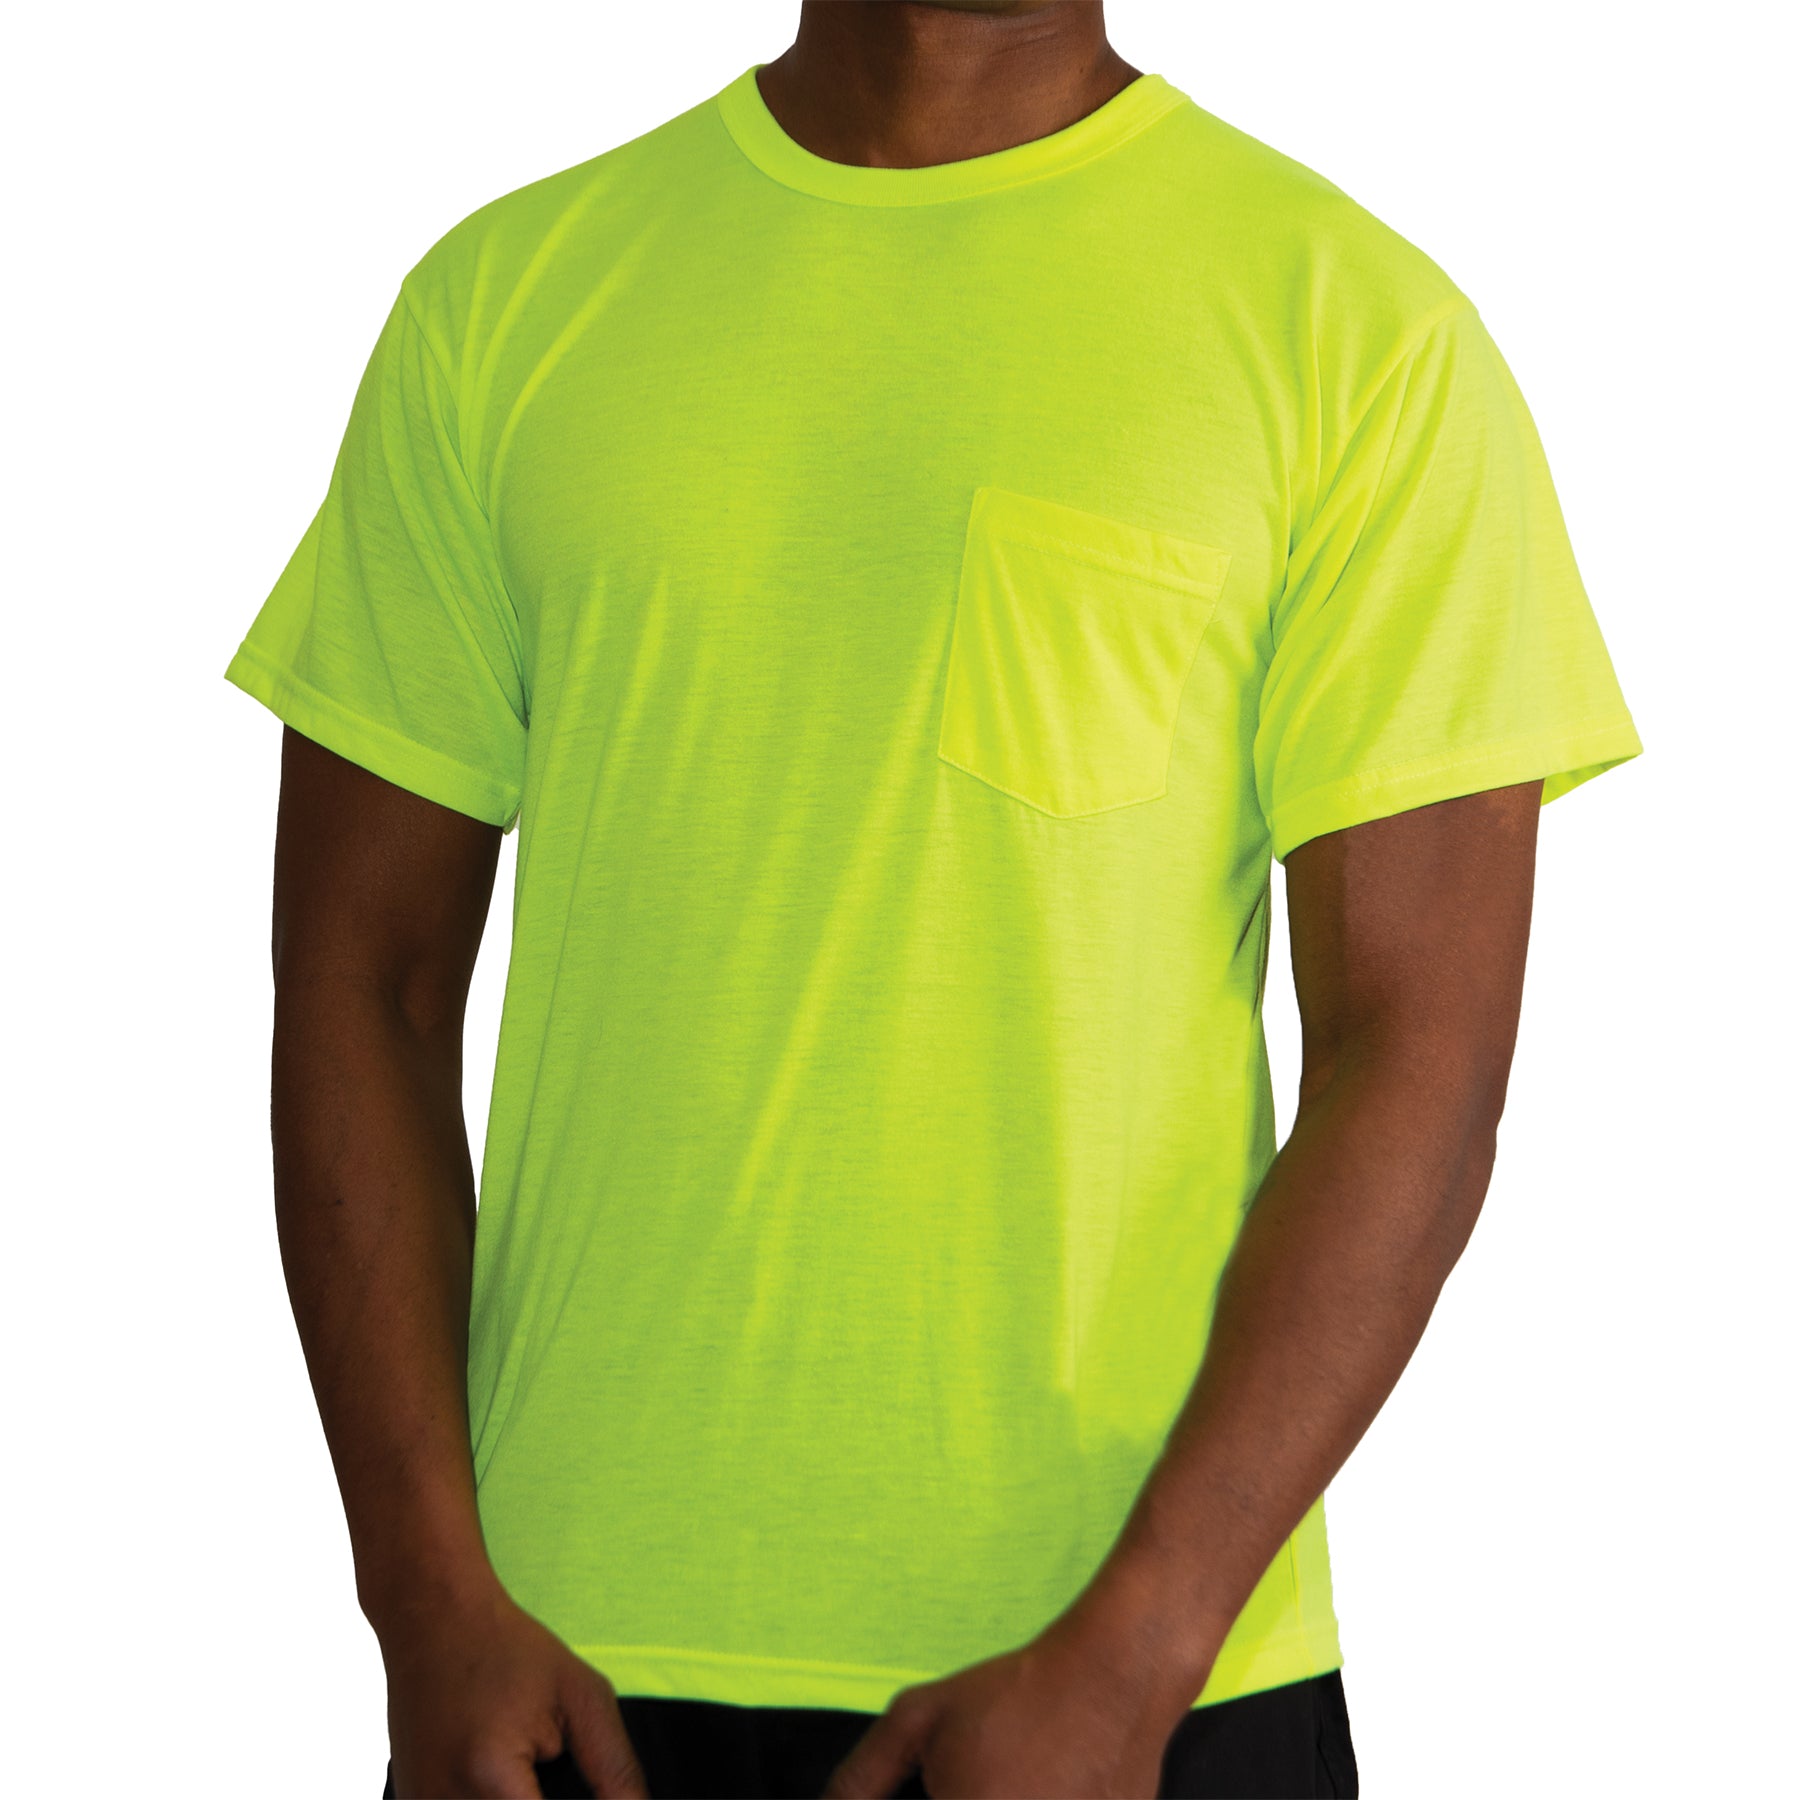 [AR 670-1] Poly Moisture Wicking Pocket T-Shirts Safety Green